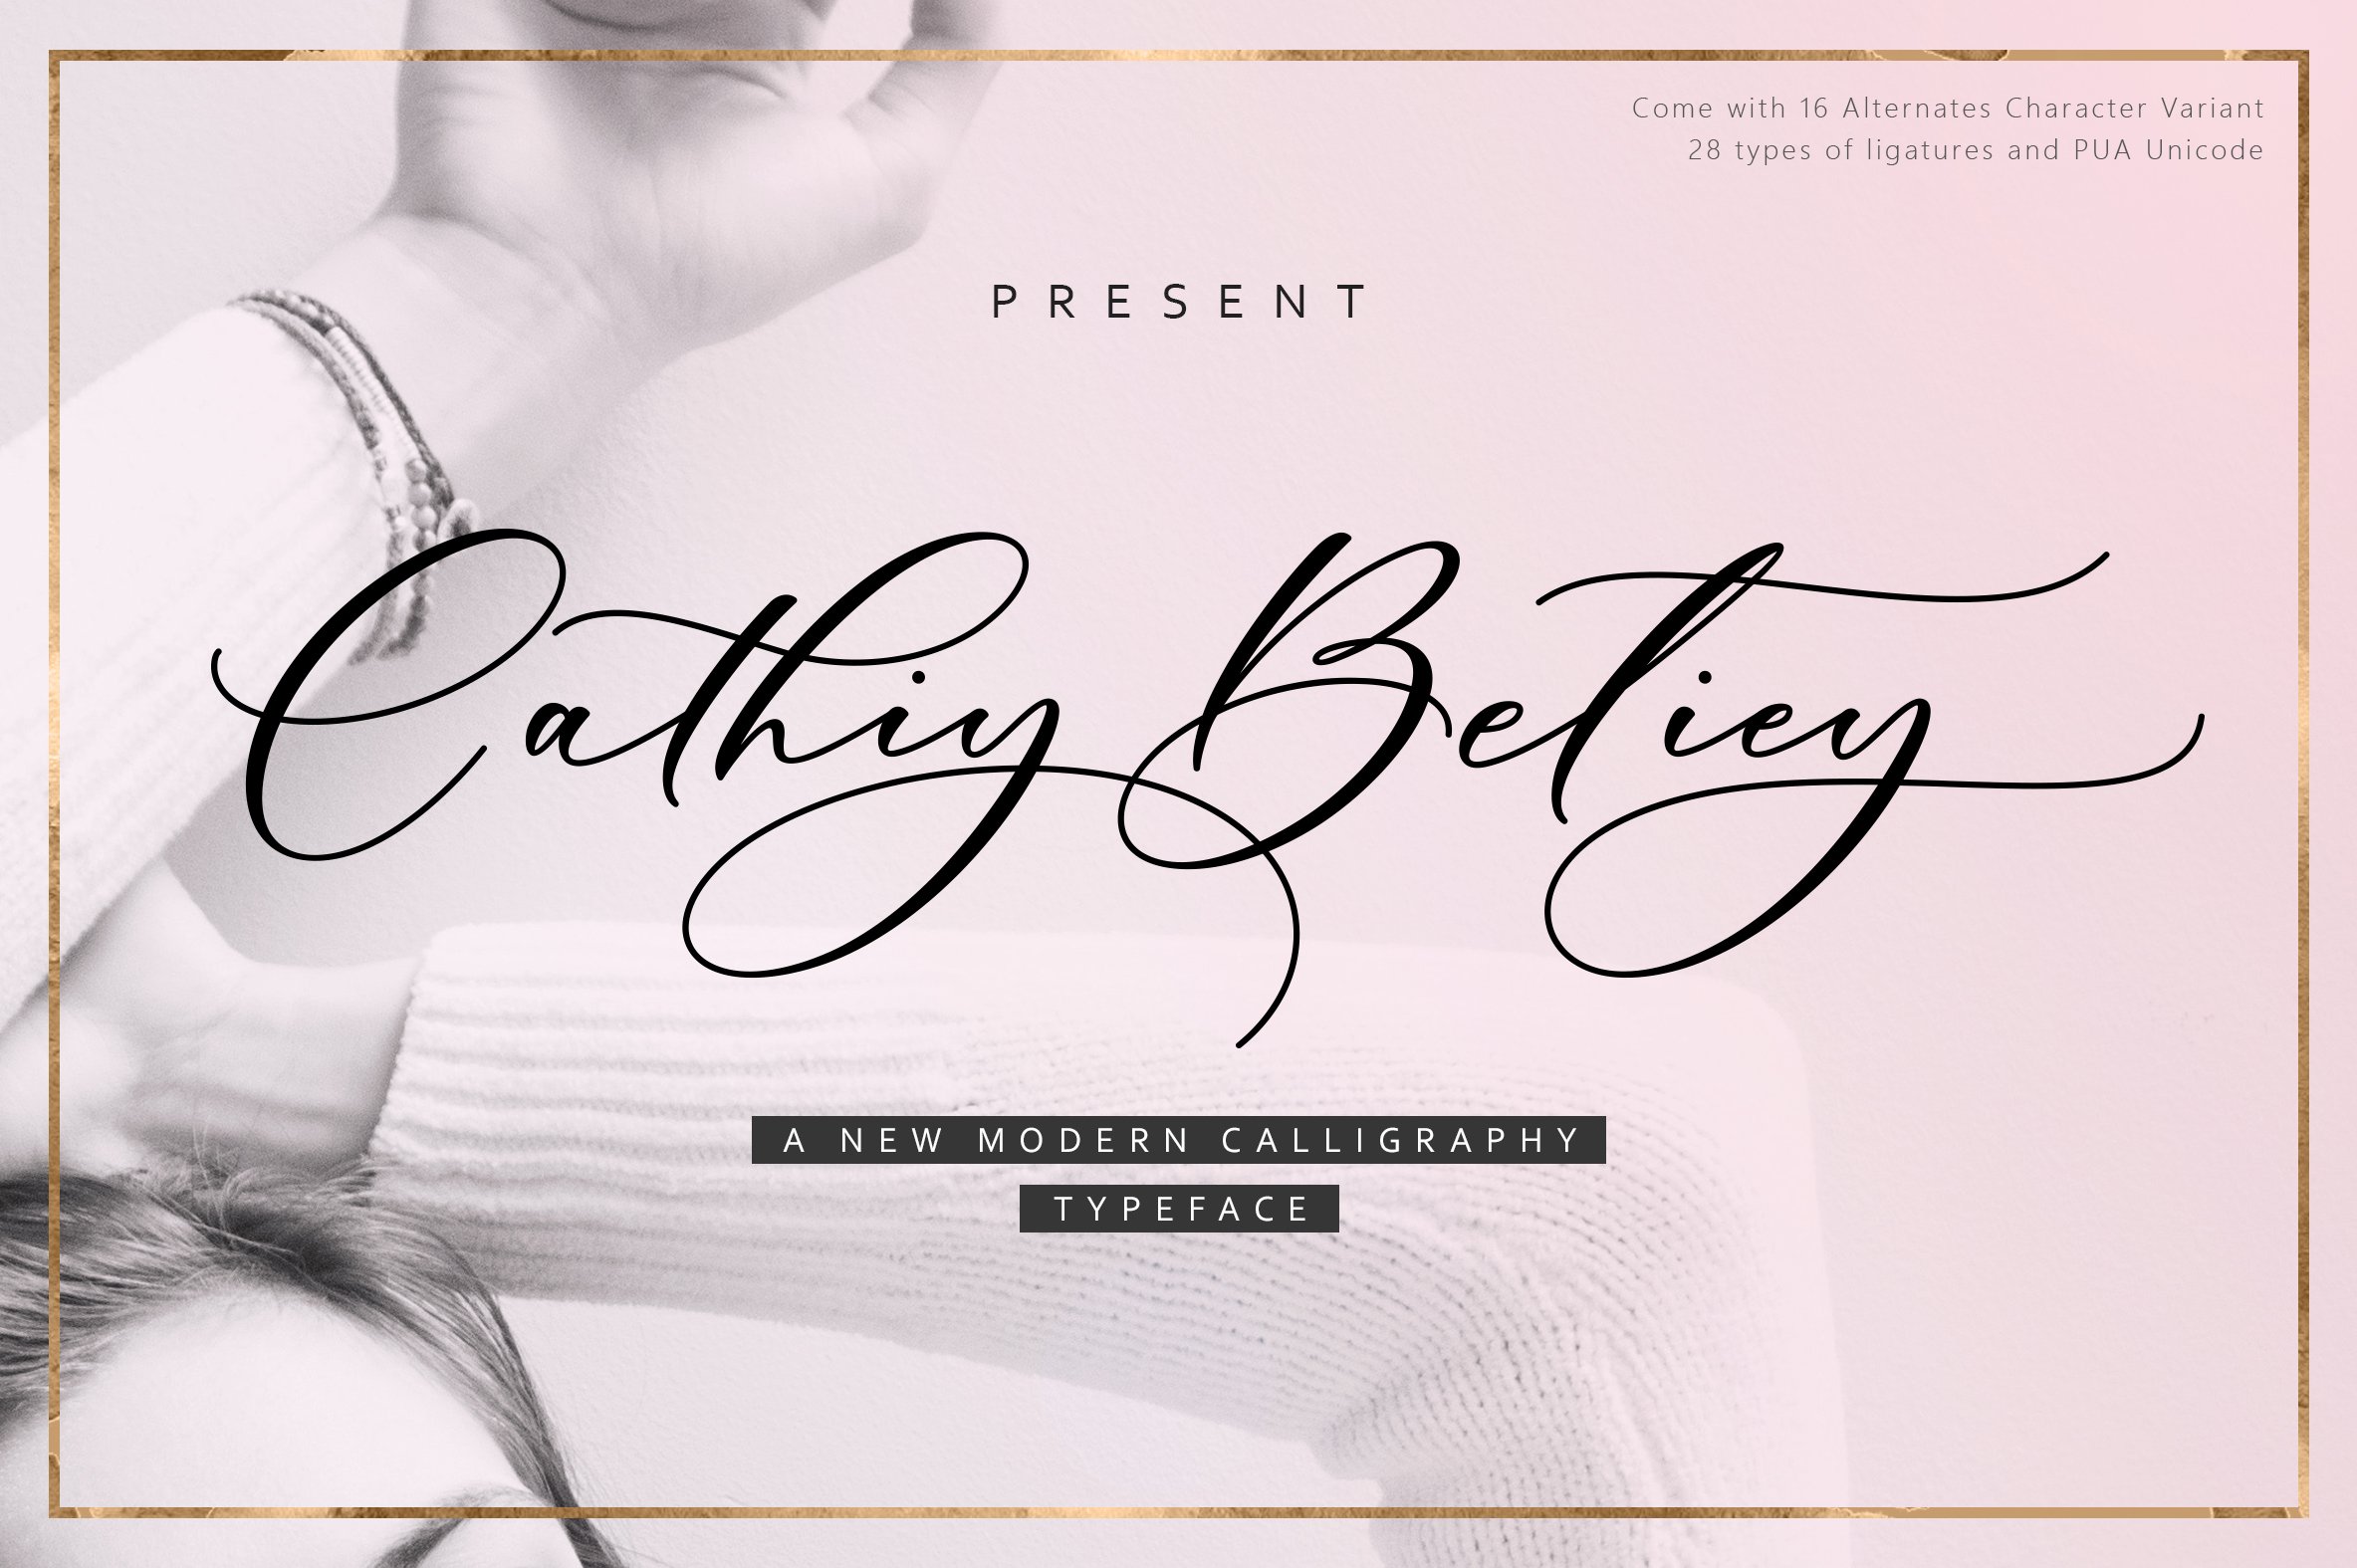 Cathiy Betiey cover image.